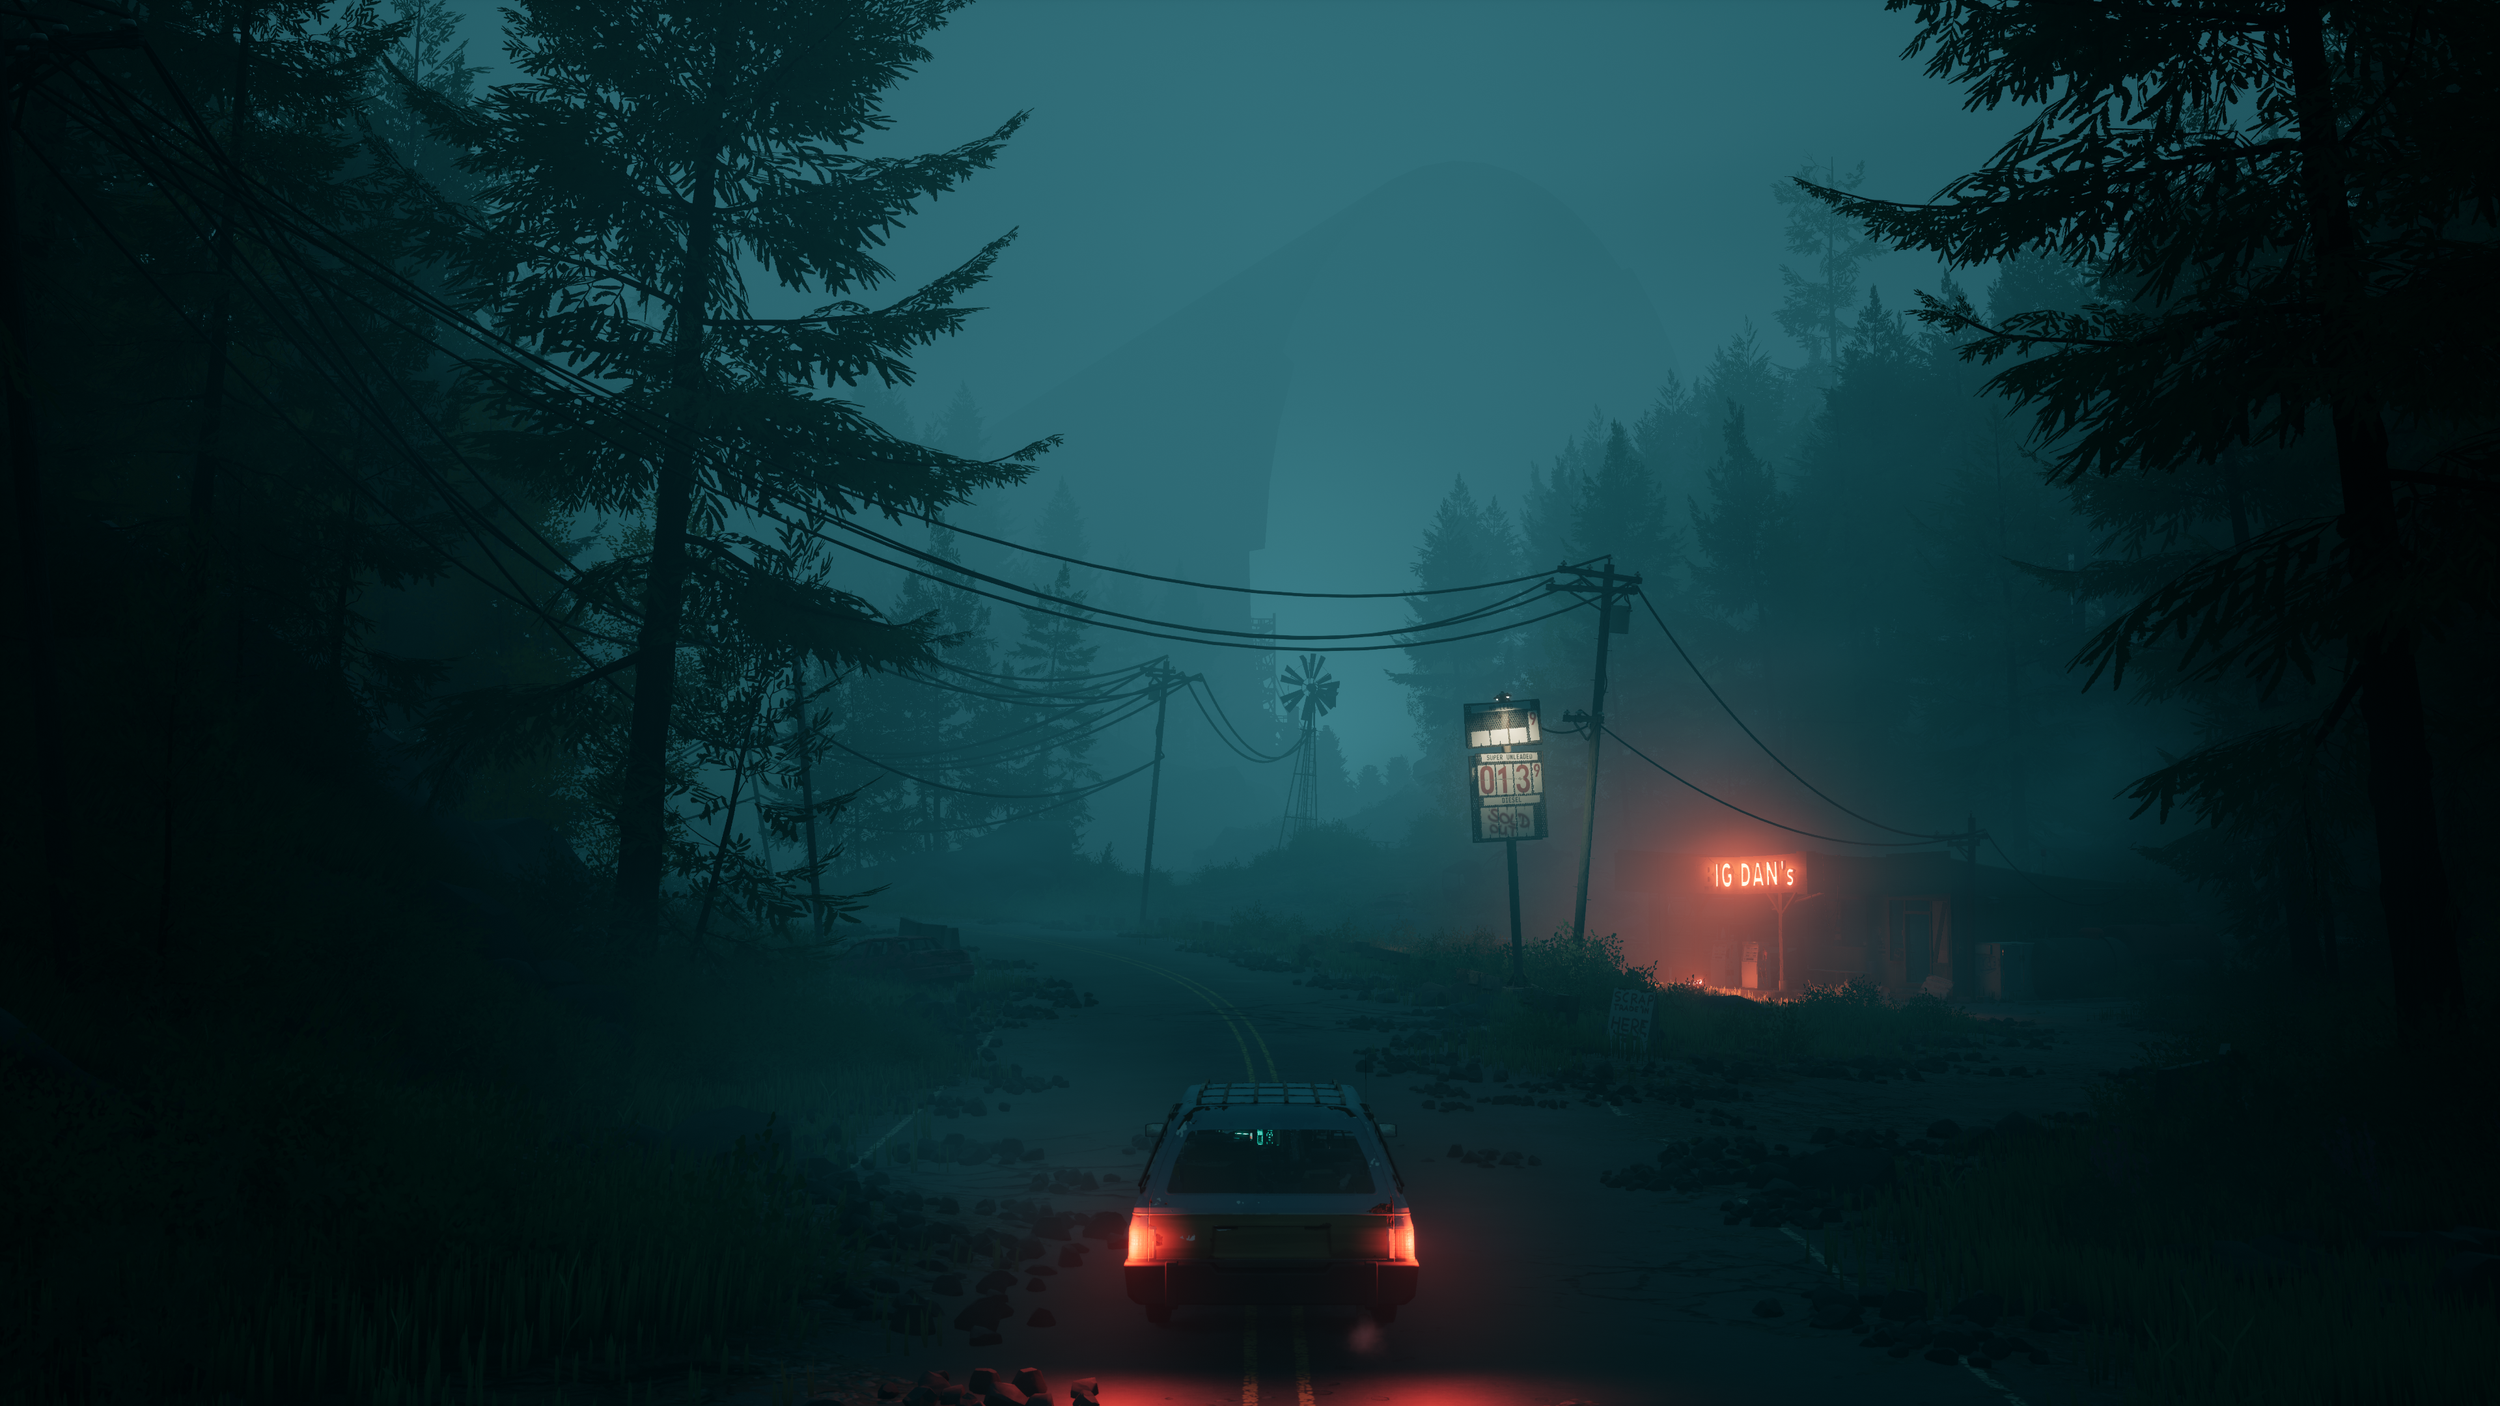 Pacific Drive - a car idles on a quiet trail in the Pacific Northwest, preparing for a trip into the dark, foggy woods and the mysterious beyond